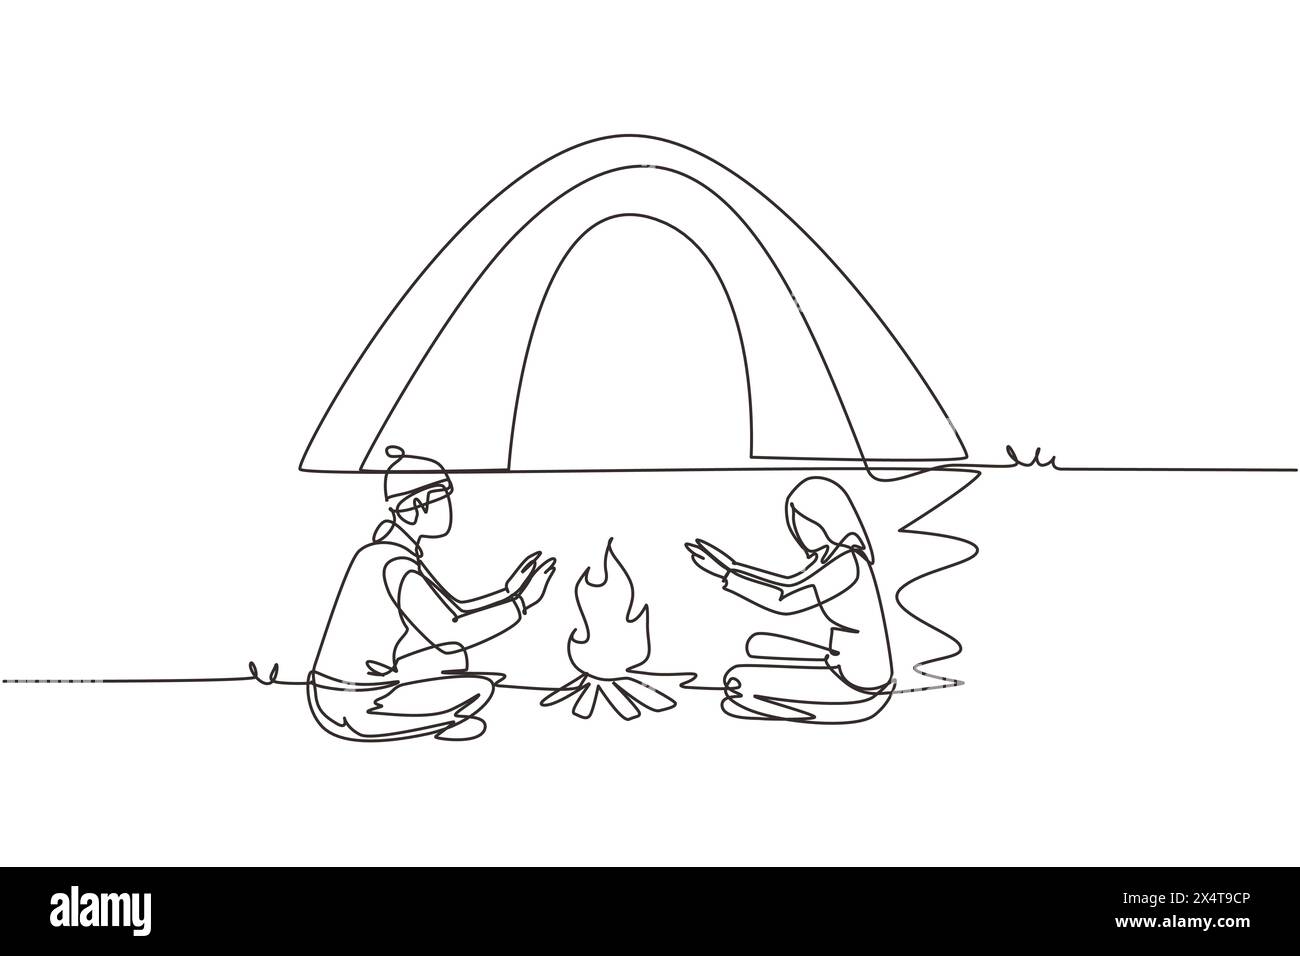 Single continuous line drawing traveling couple active recreation camping around campfire tents. Man and woman warm their hands near bonfire. Dynamic Stock Vector